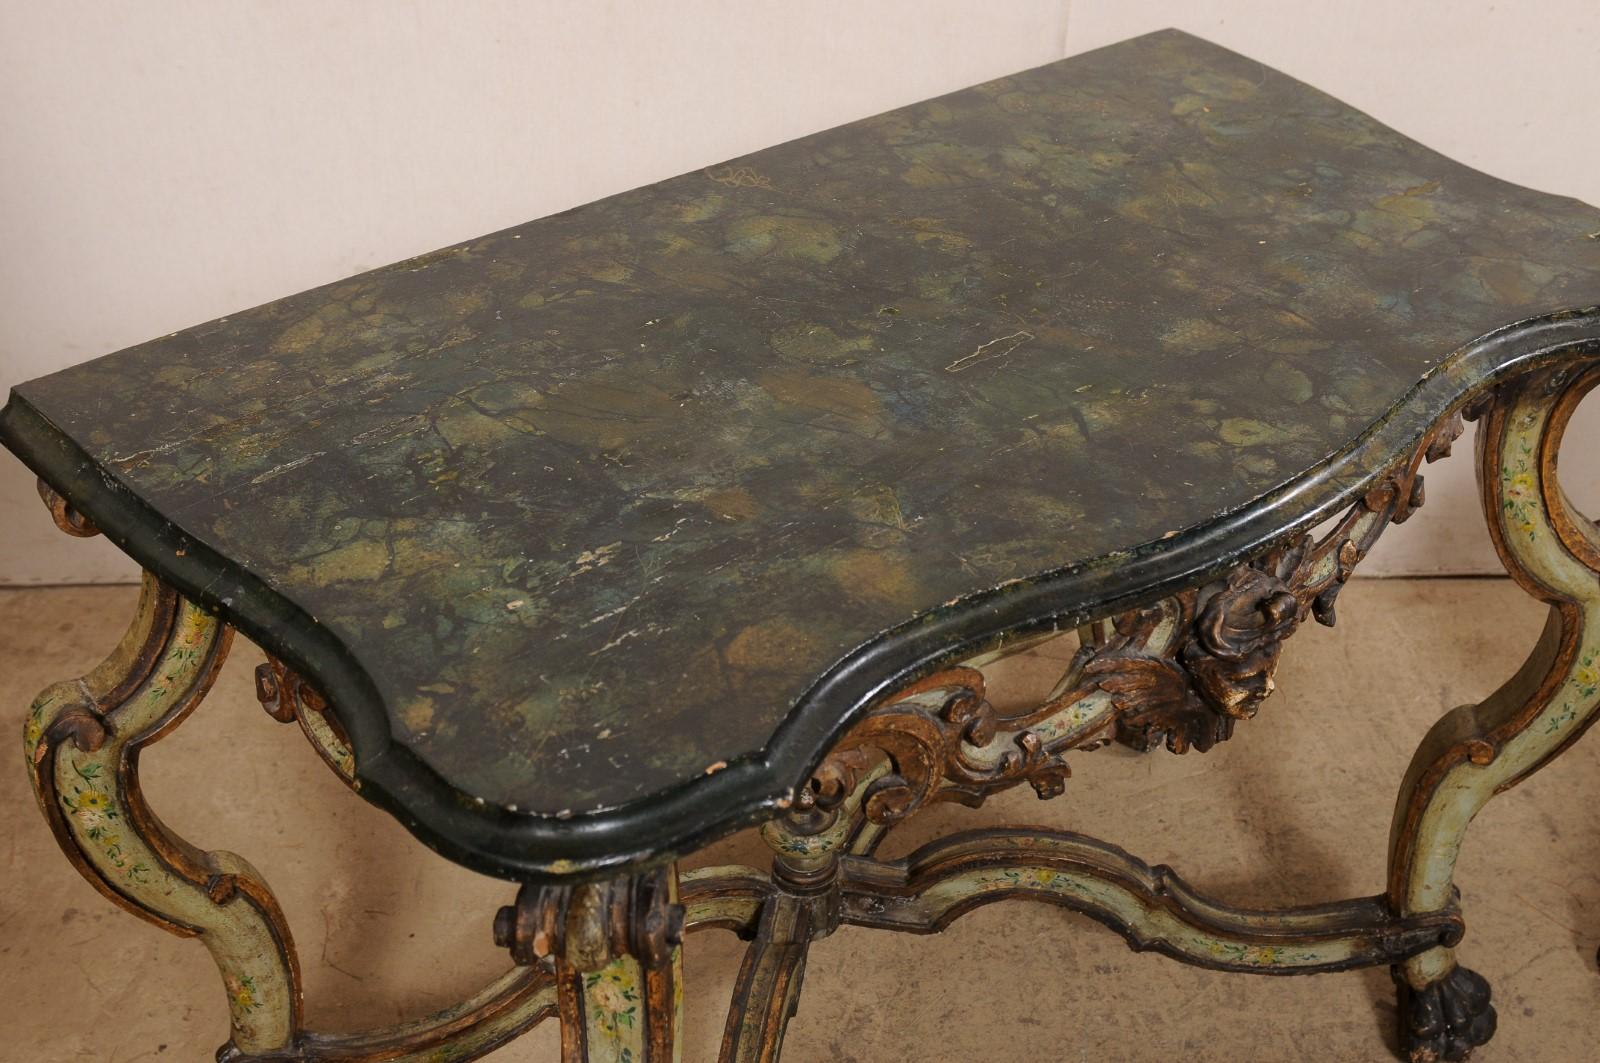 Exquisite Pair of 18th C. Italian Venetian Carved & Painted Wood Console Tables In Good Condition For Sale In Atlanta, GA